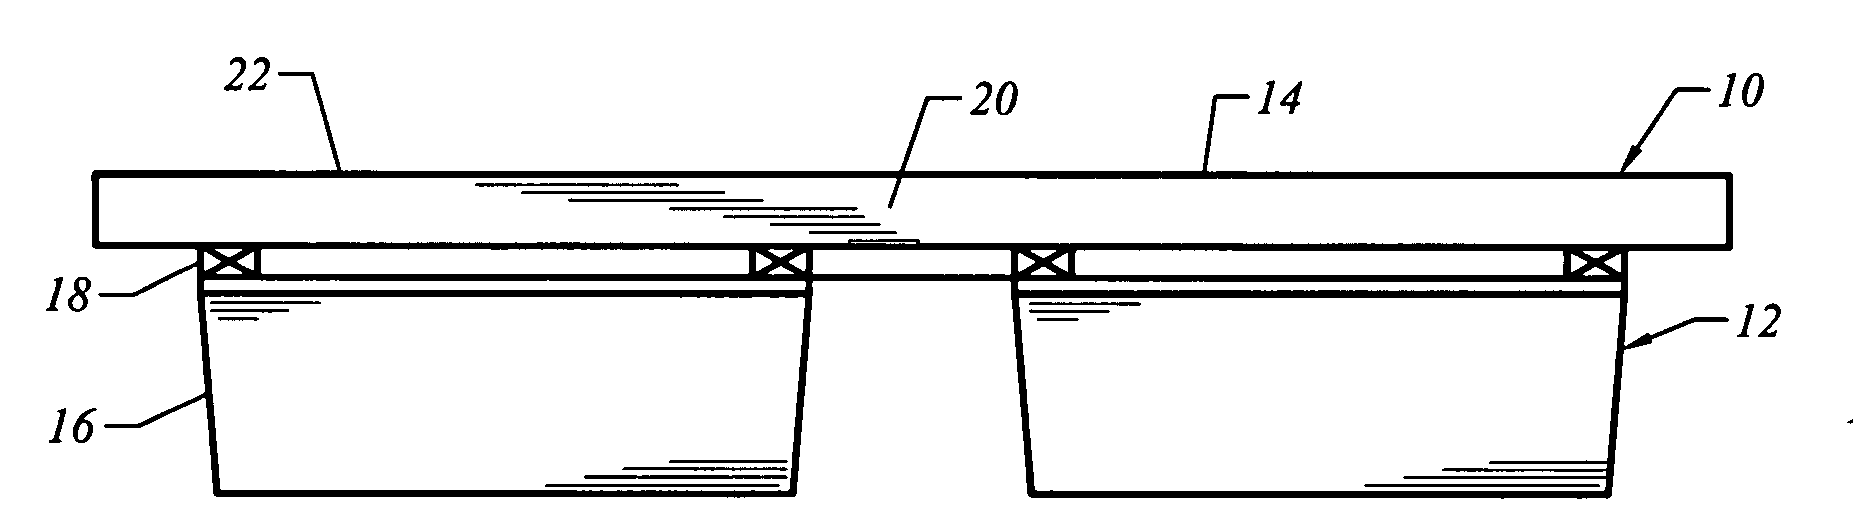 Modular floating dock frame and interconnection system